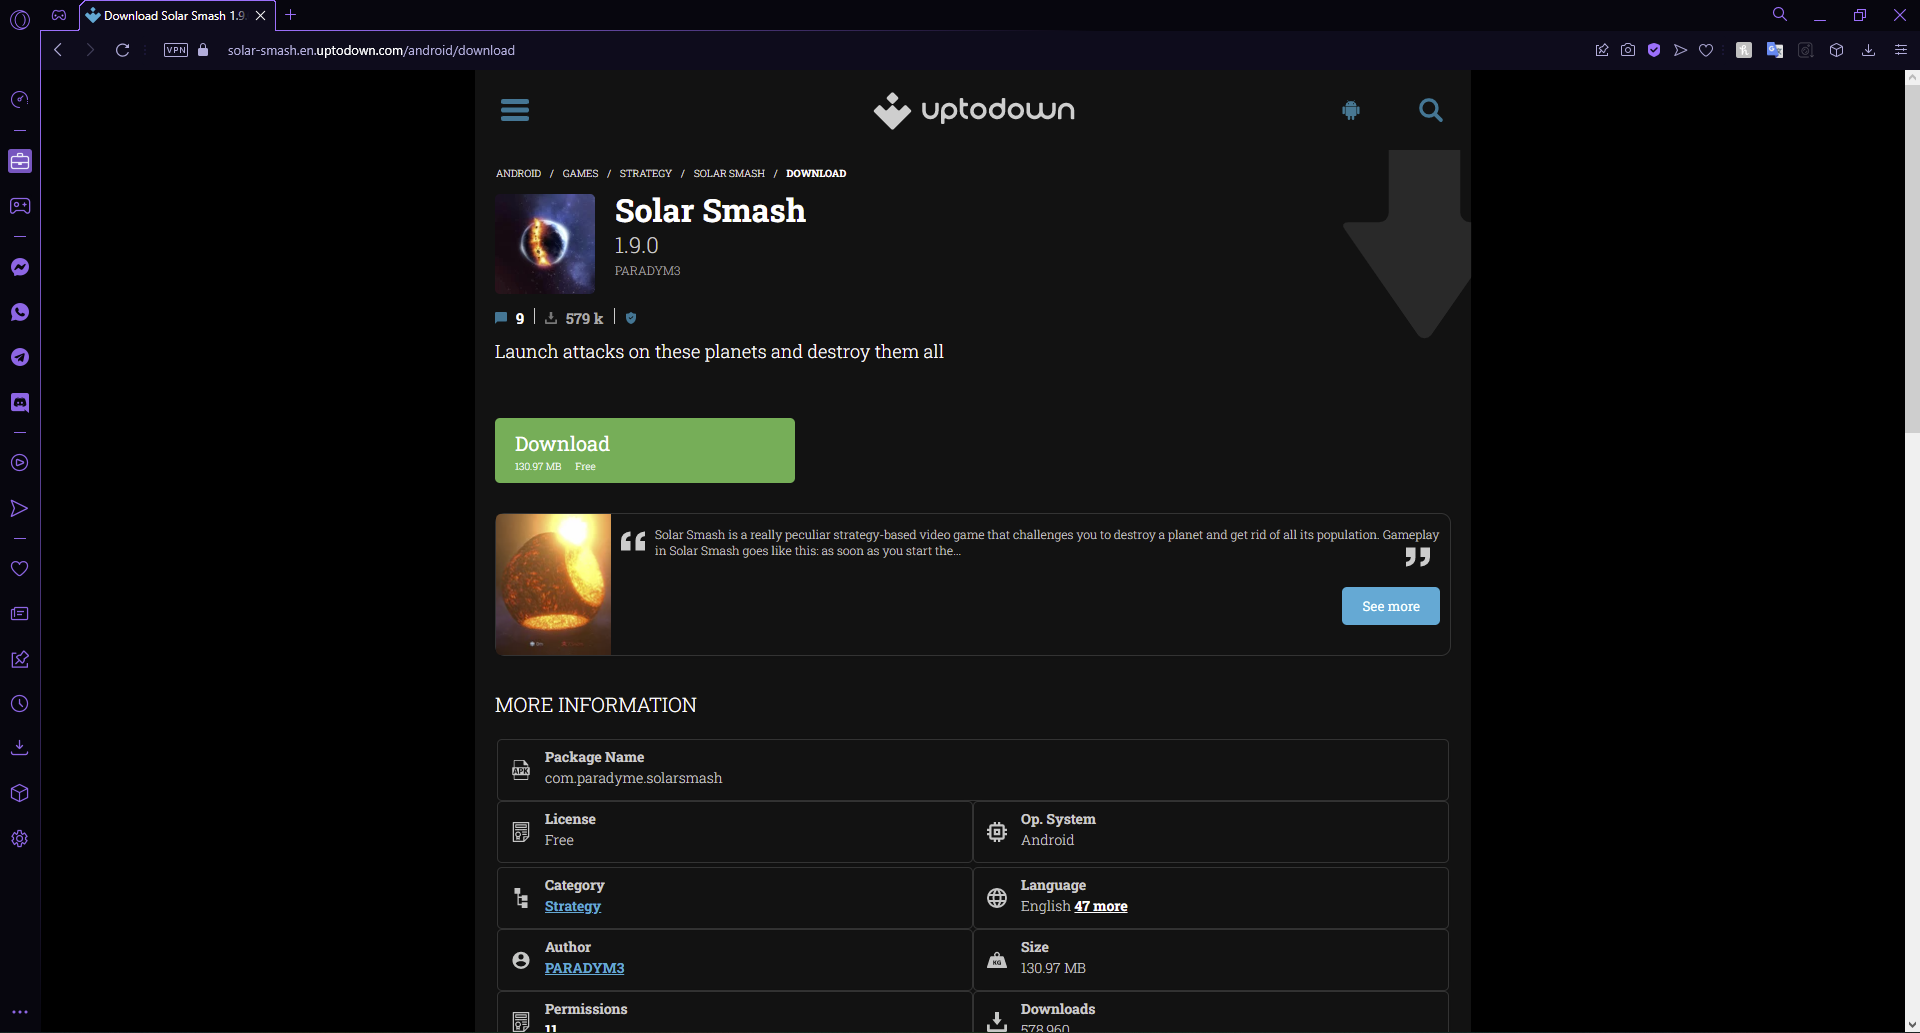 Download Solar Smash for Windows 11 from a trusted third-party source.